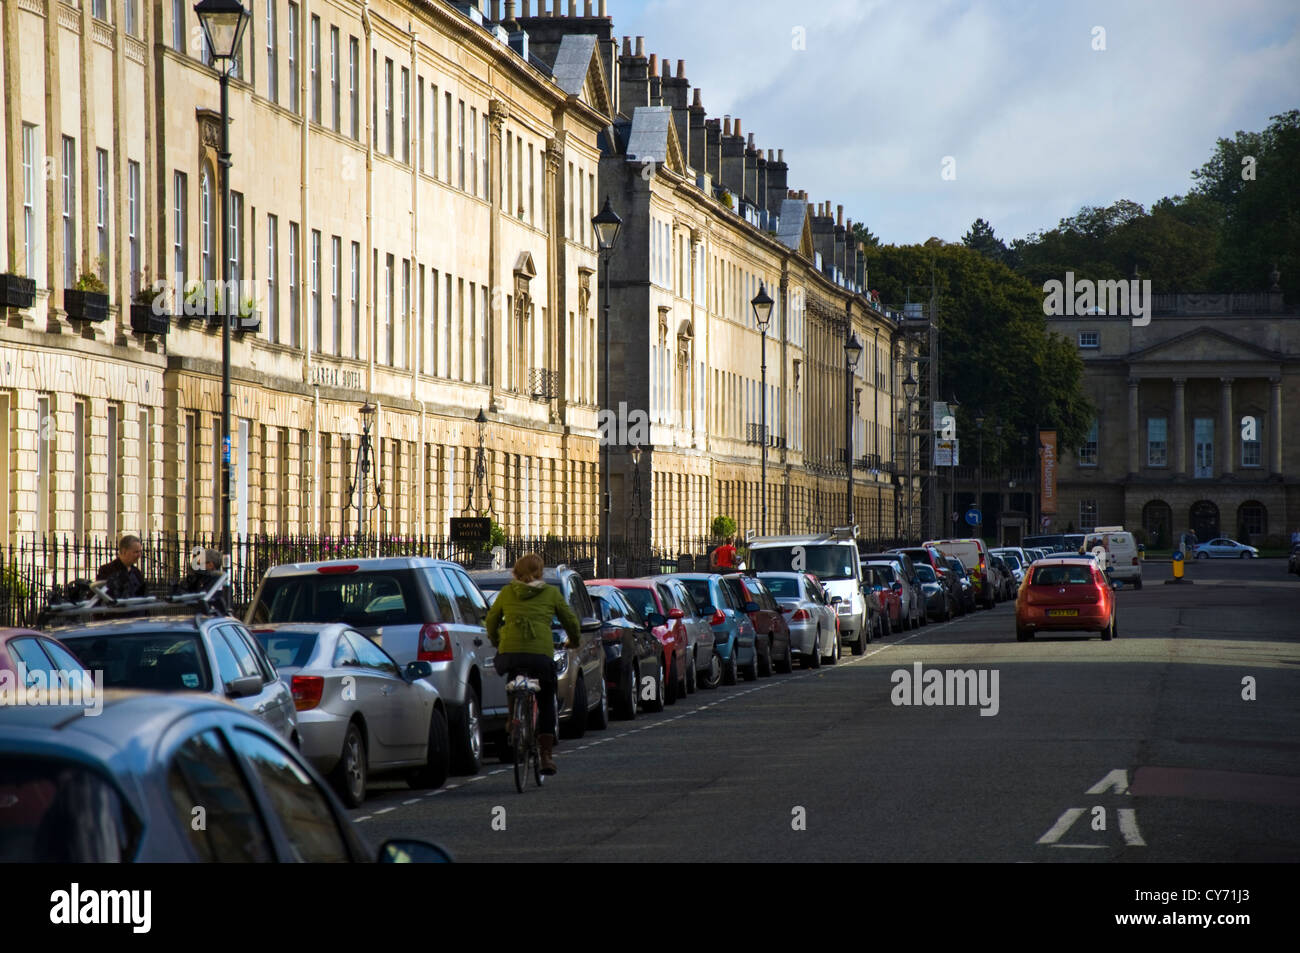 Cars parked on Great Pulteney Street in Bath Stock Photo